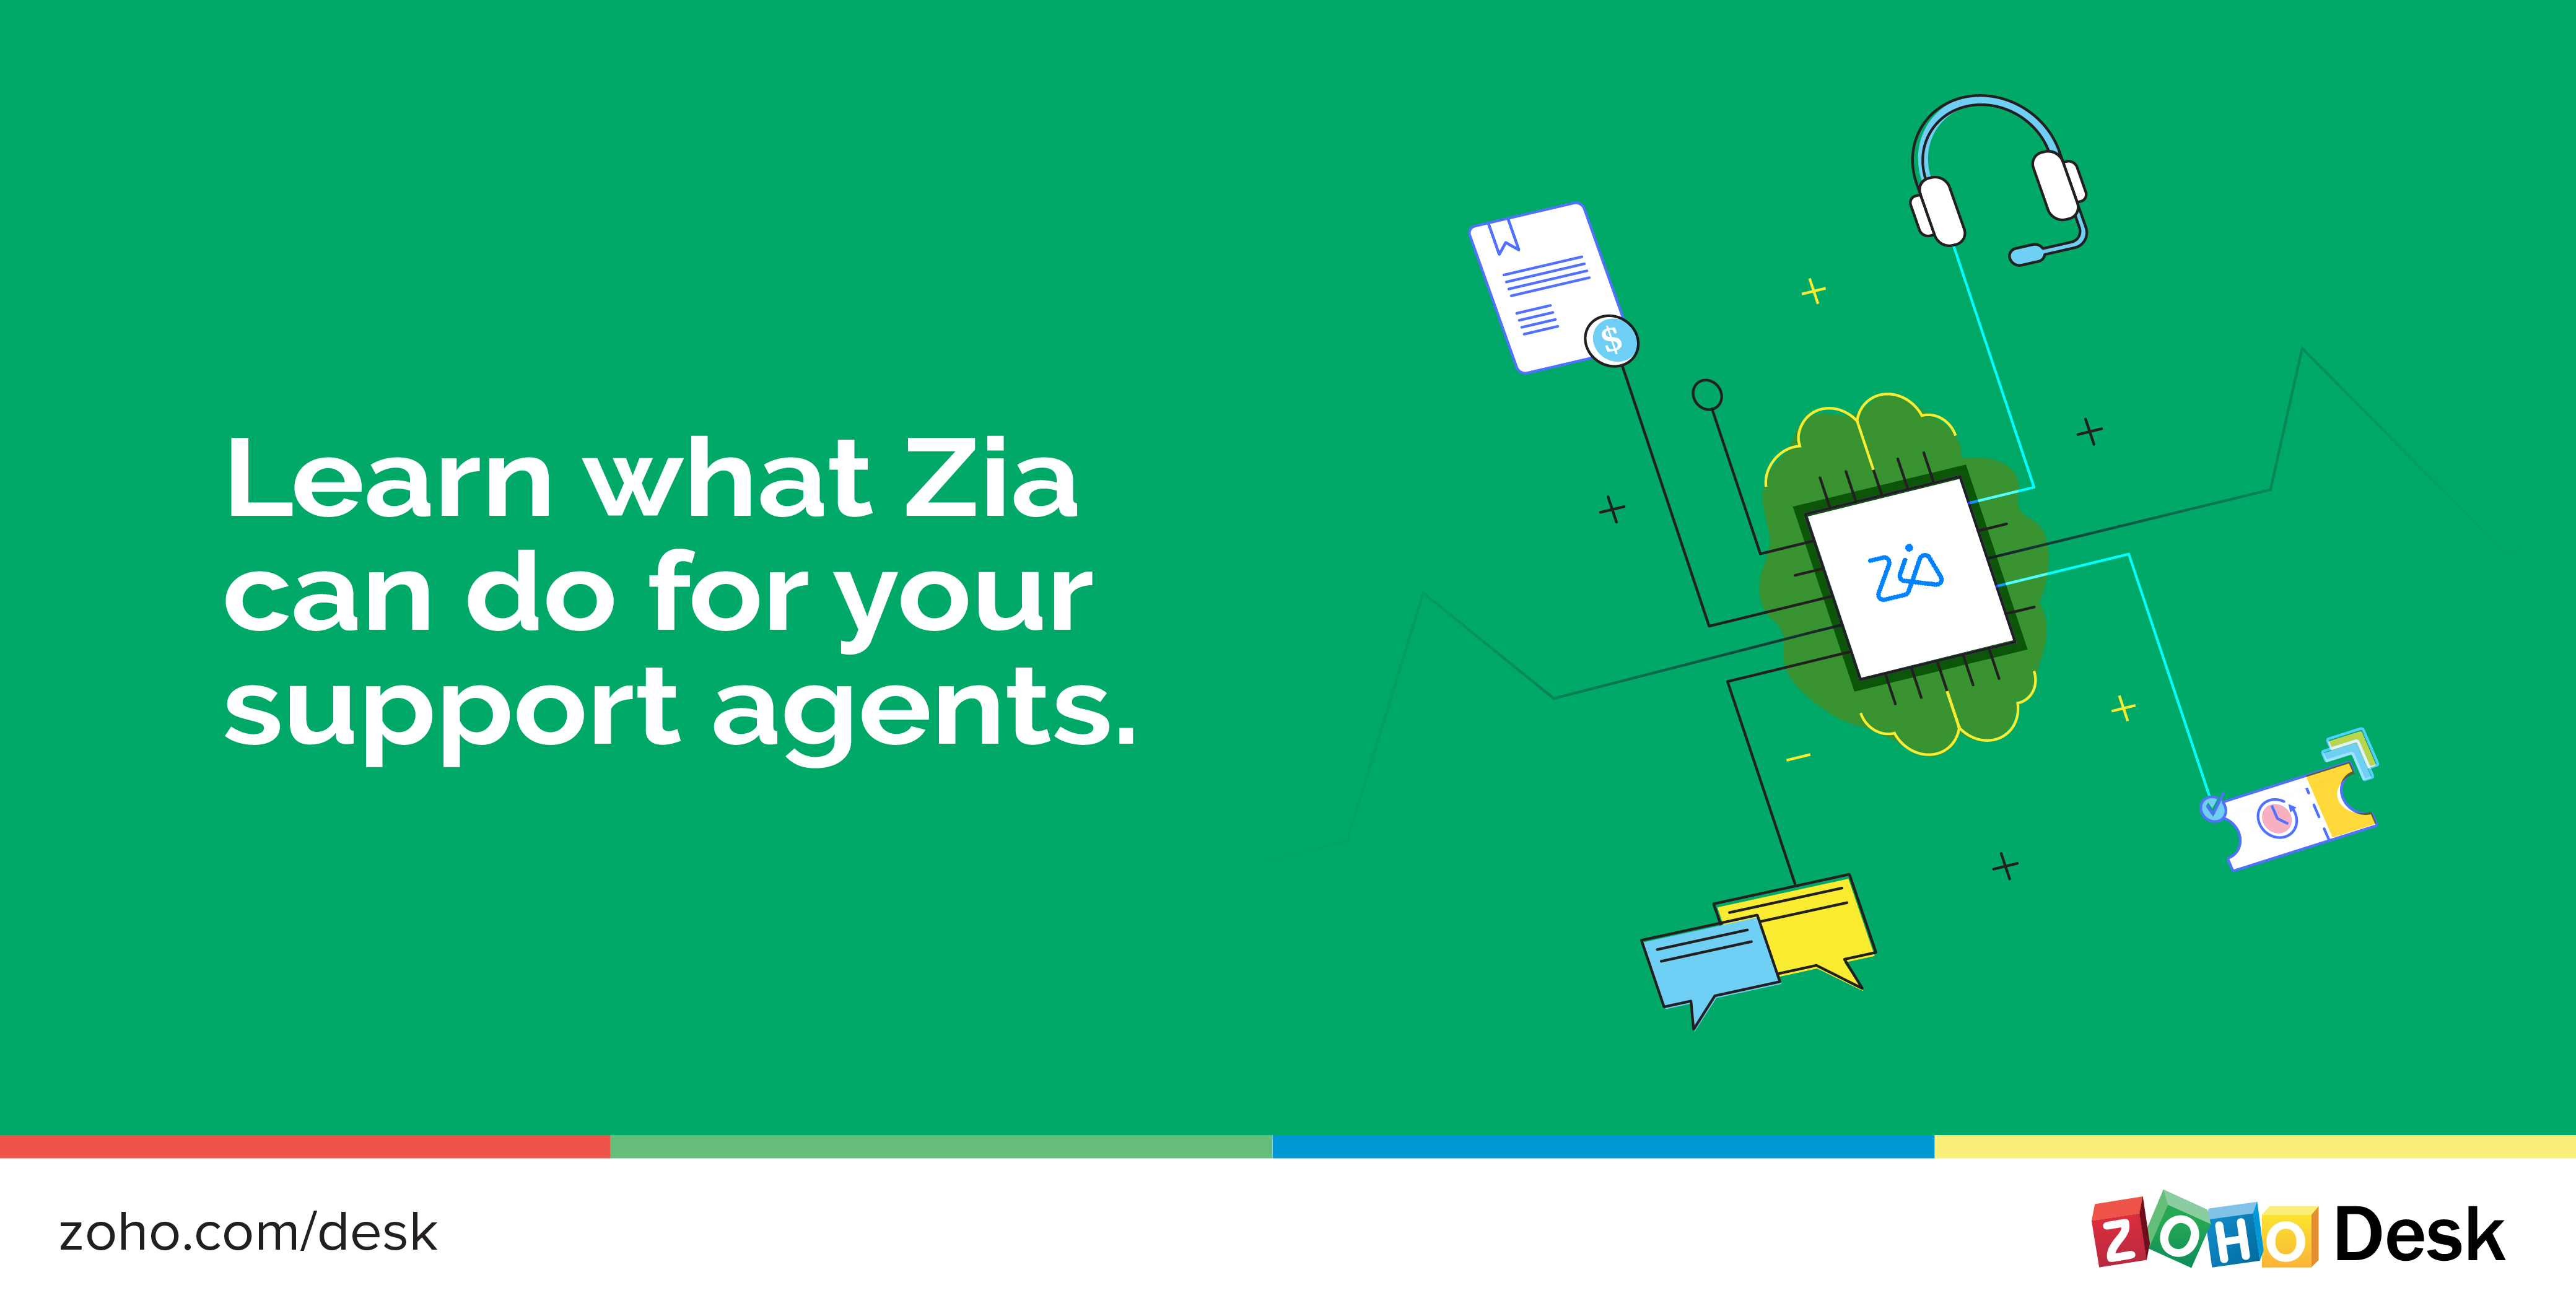 Zia for Customer Service, Part 1: Zia for Support Agents